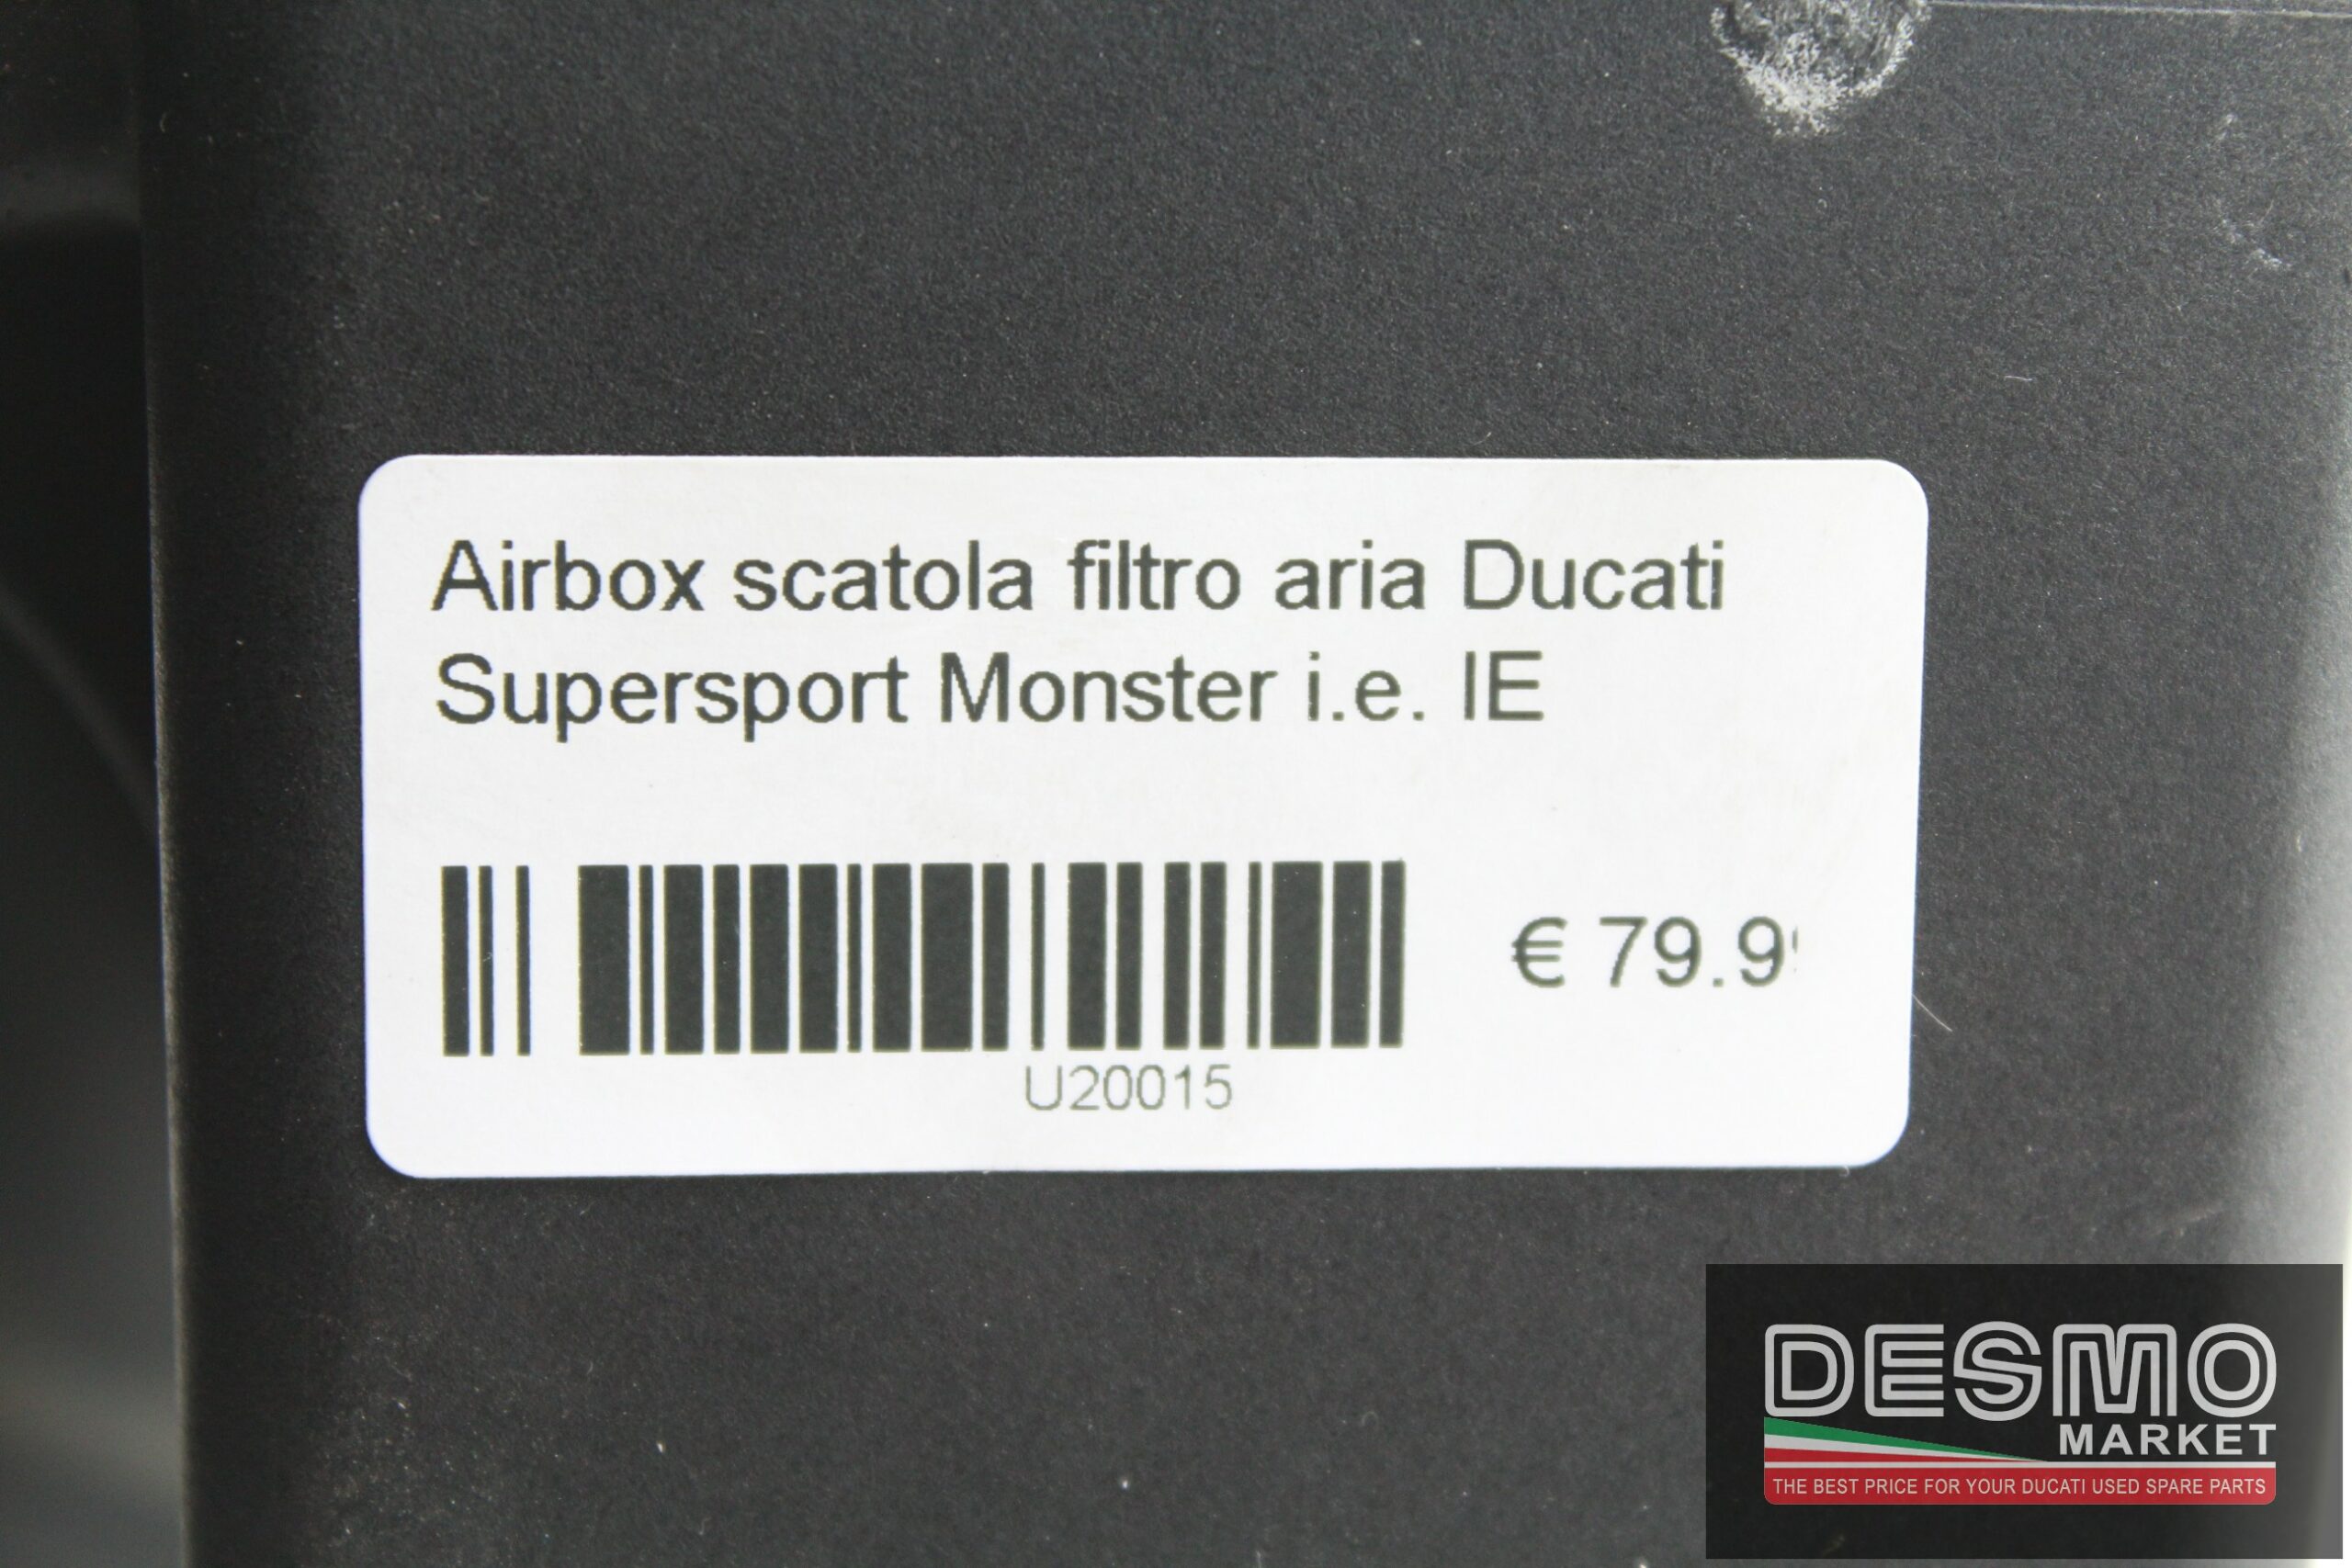 Airbox scatola filtro aria Ducati Supersport Monster i.e. IE